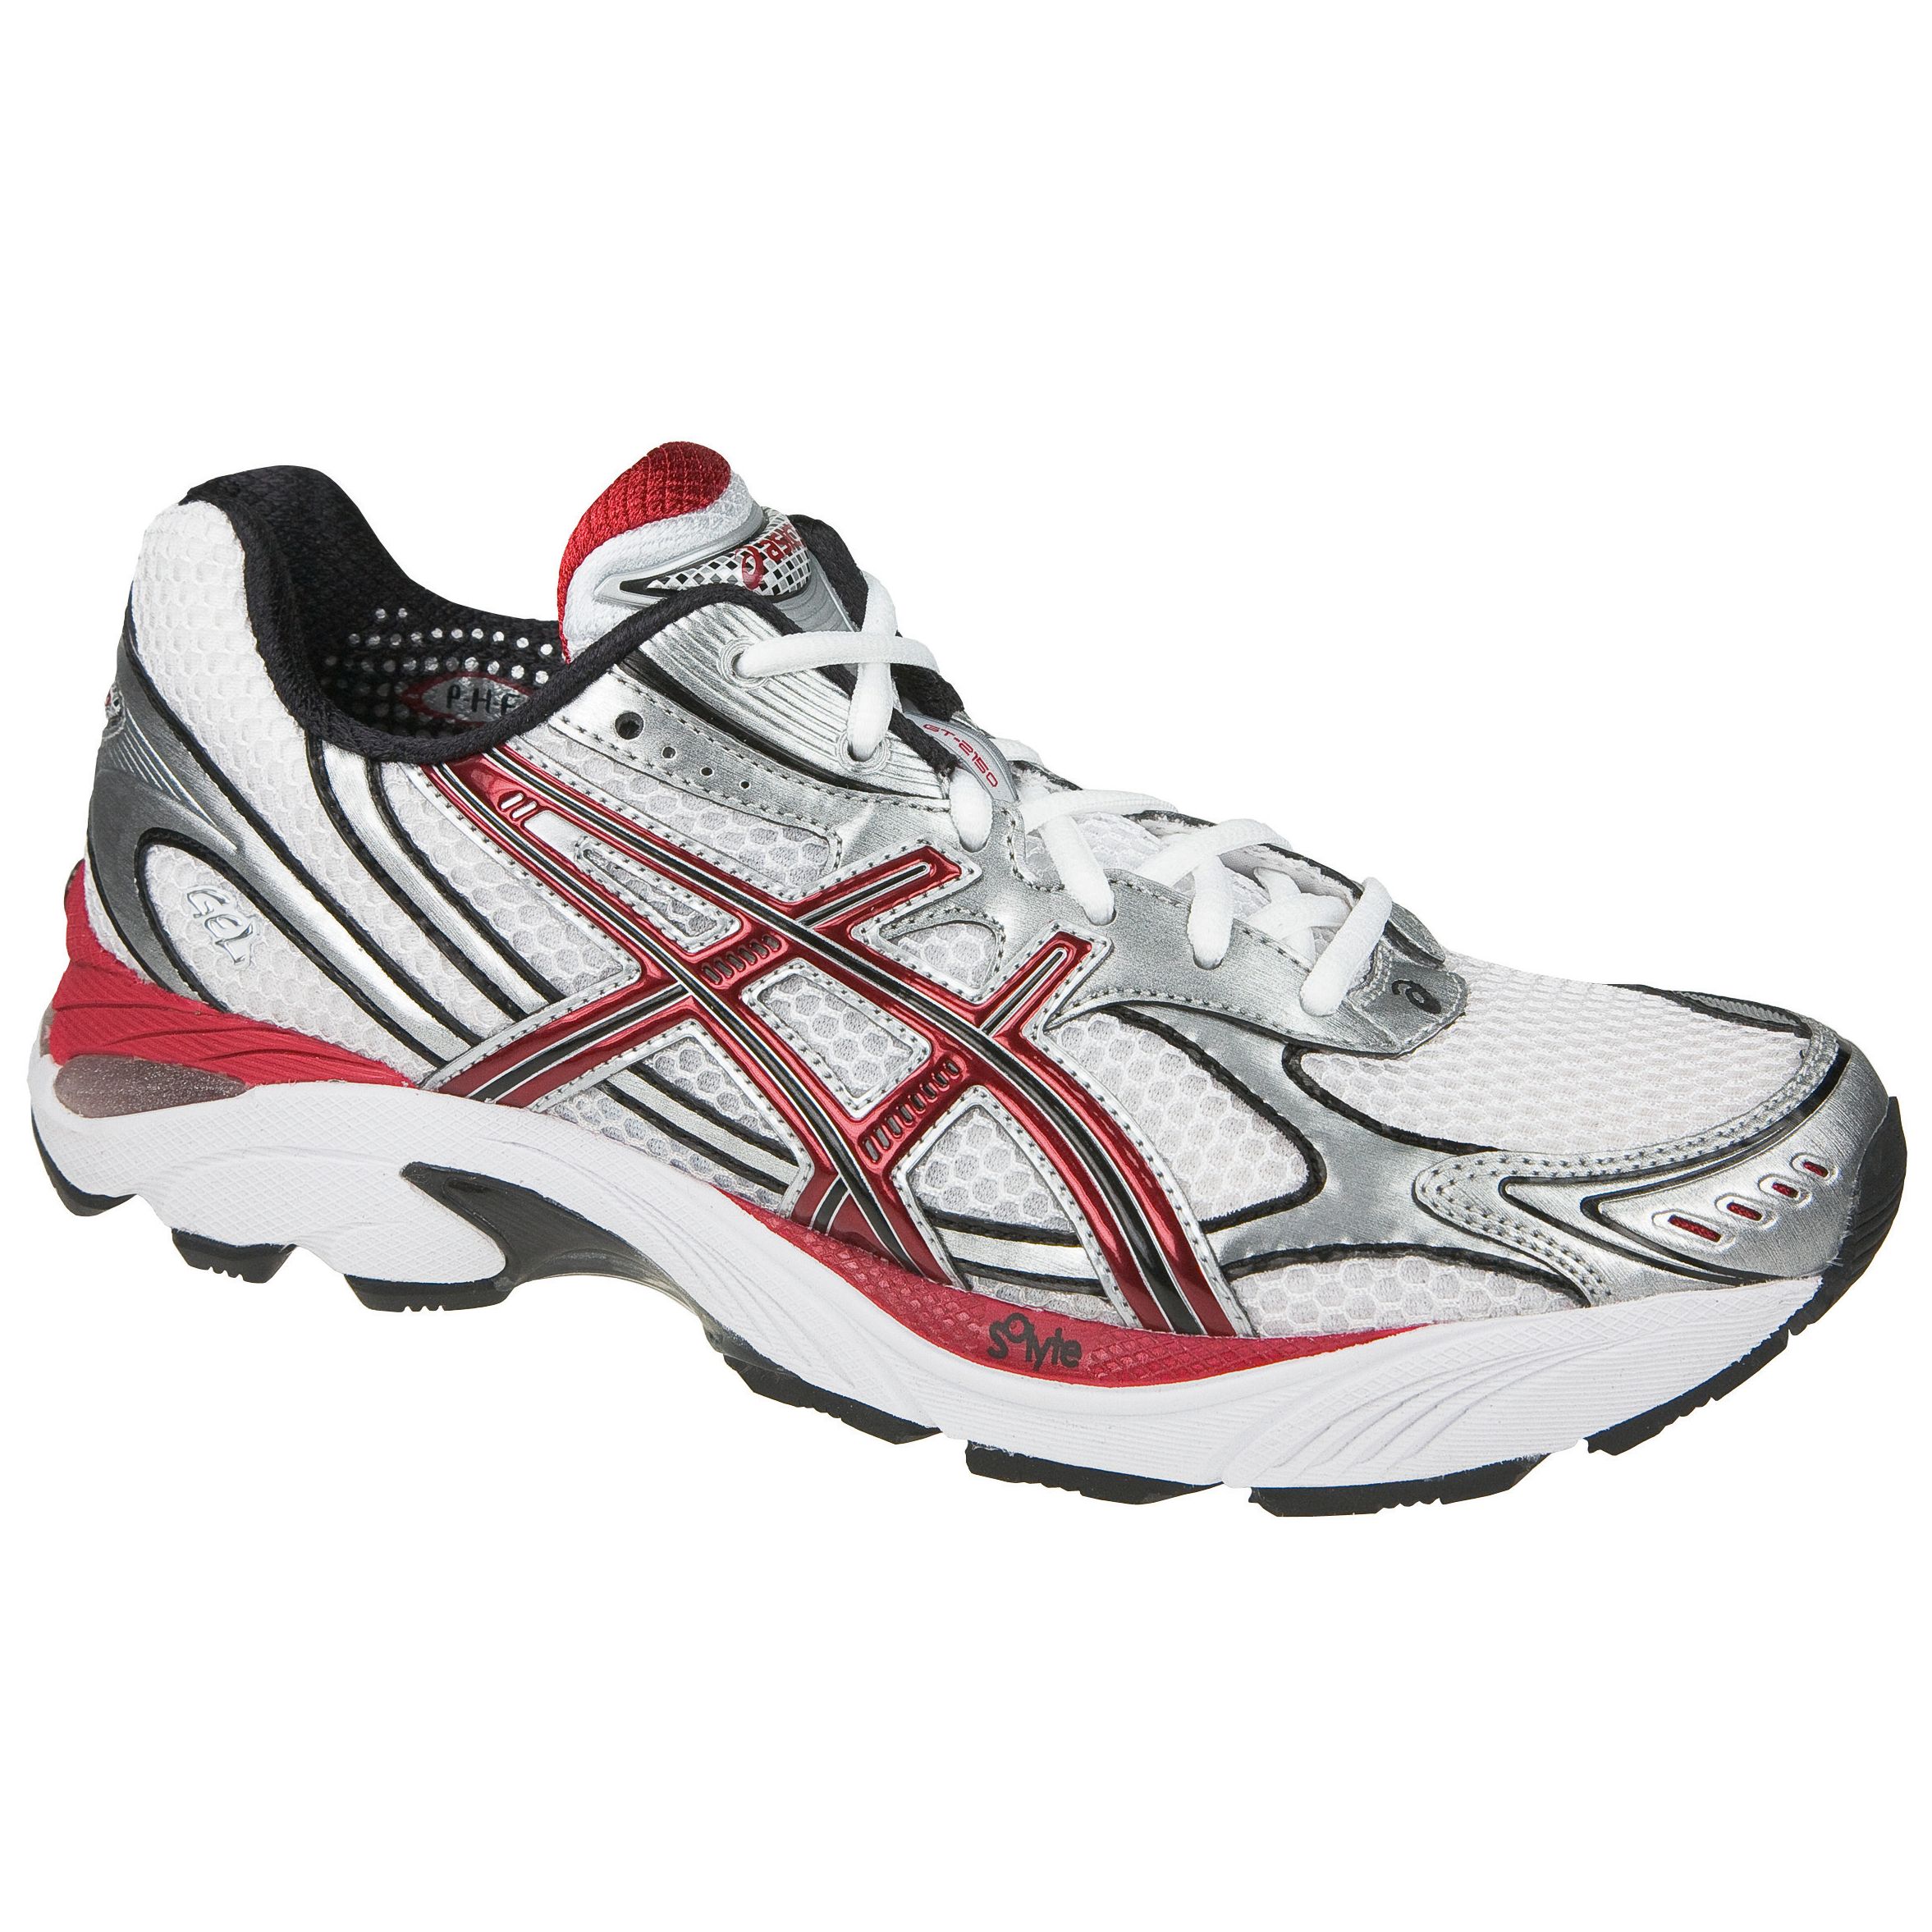 Asics GT2150 Running Shoes, White/red, 8.5